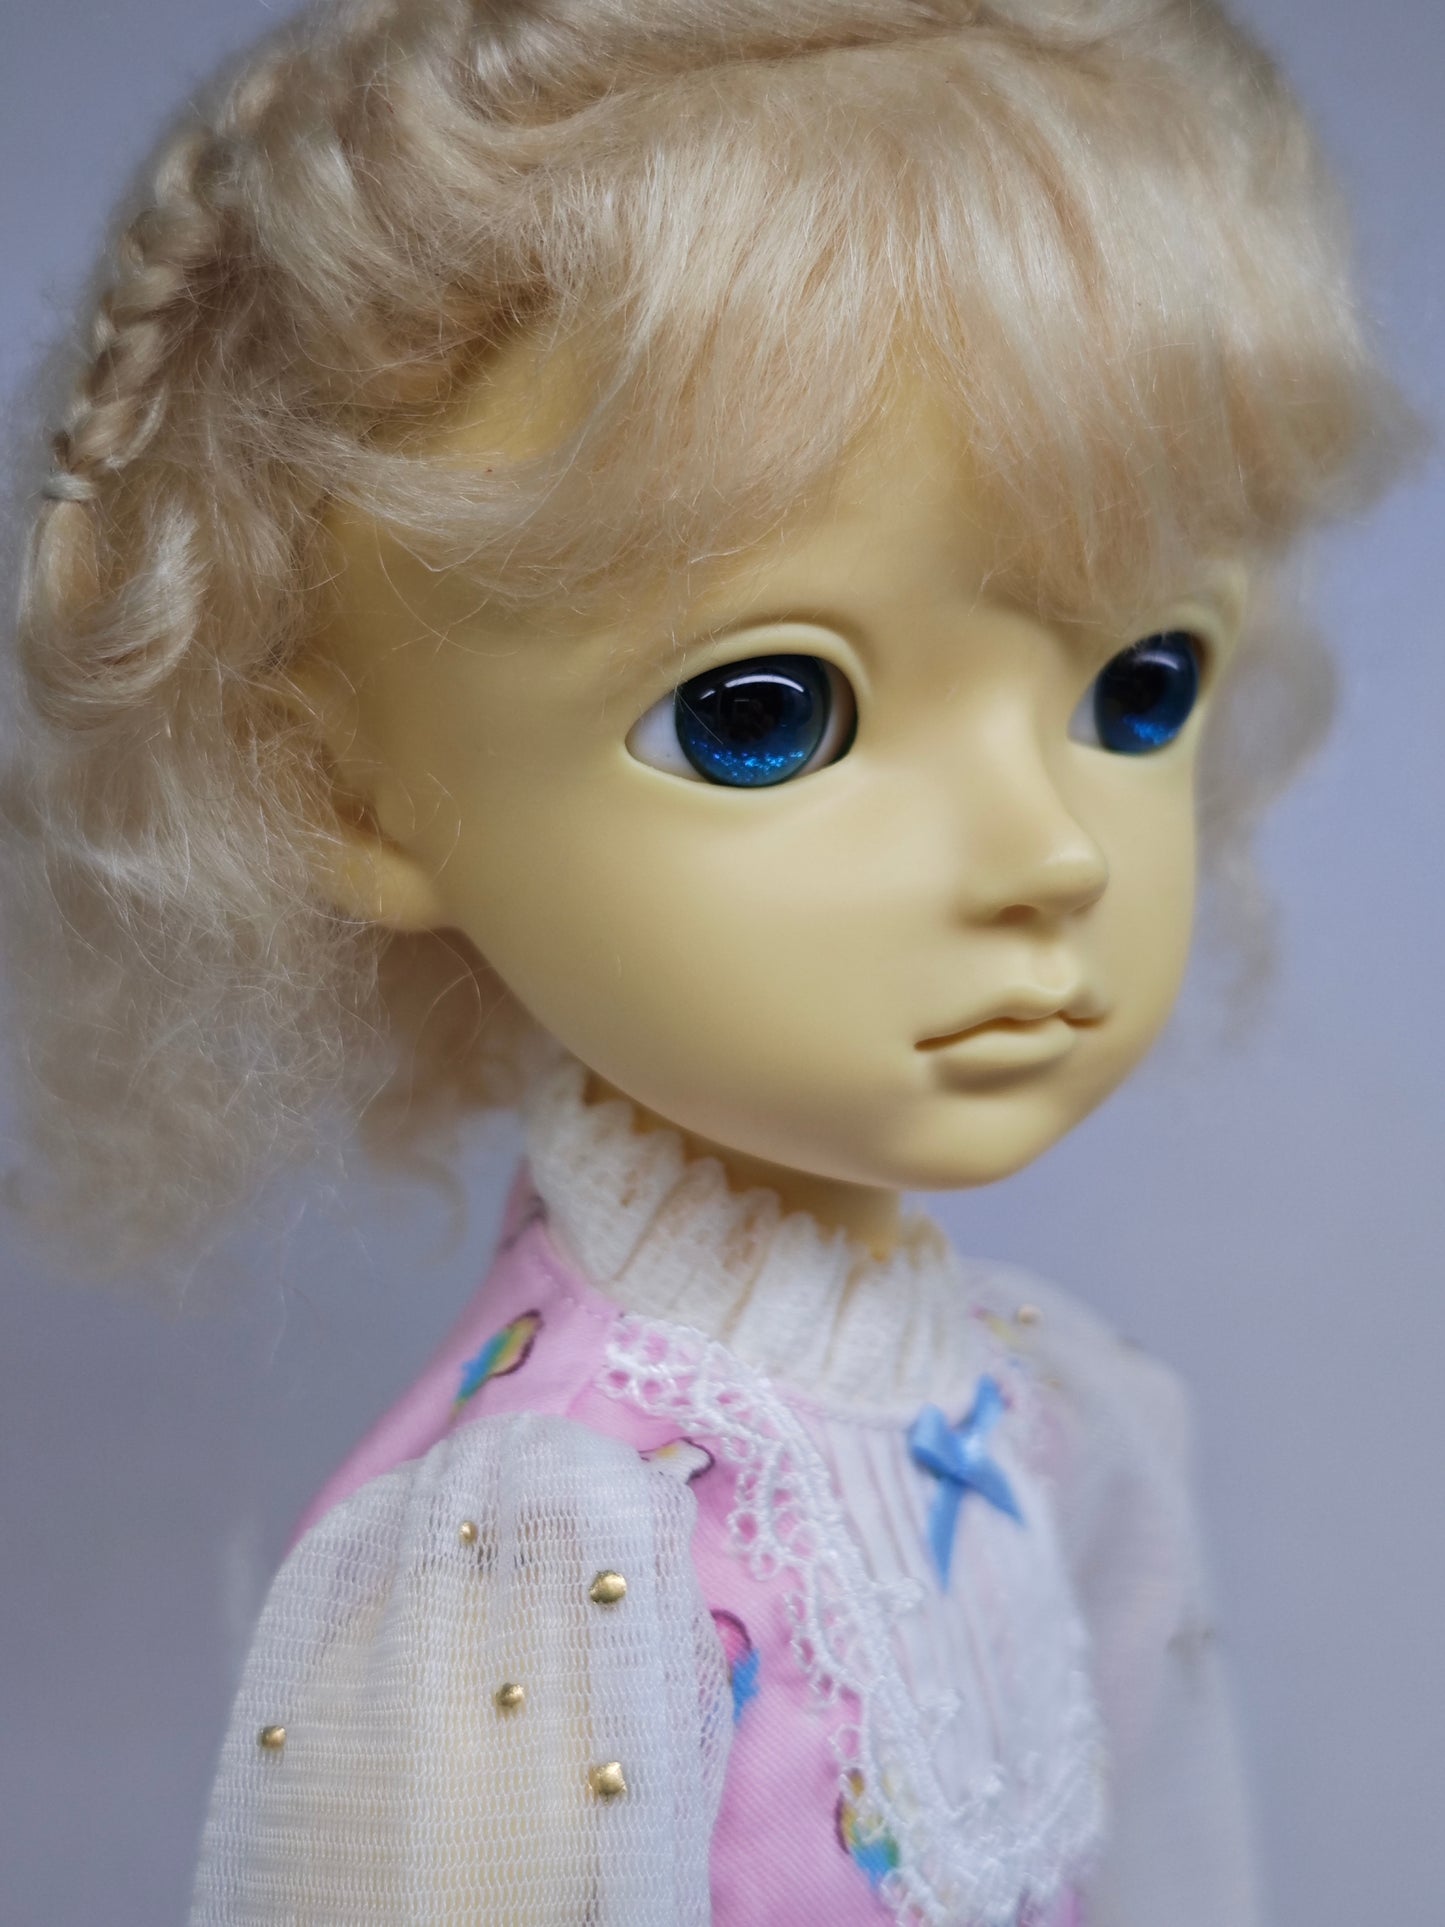 1/4 girl doll Alice with wig and dress, no makeup